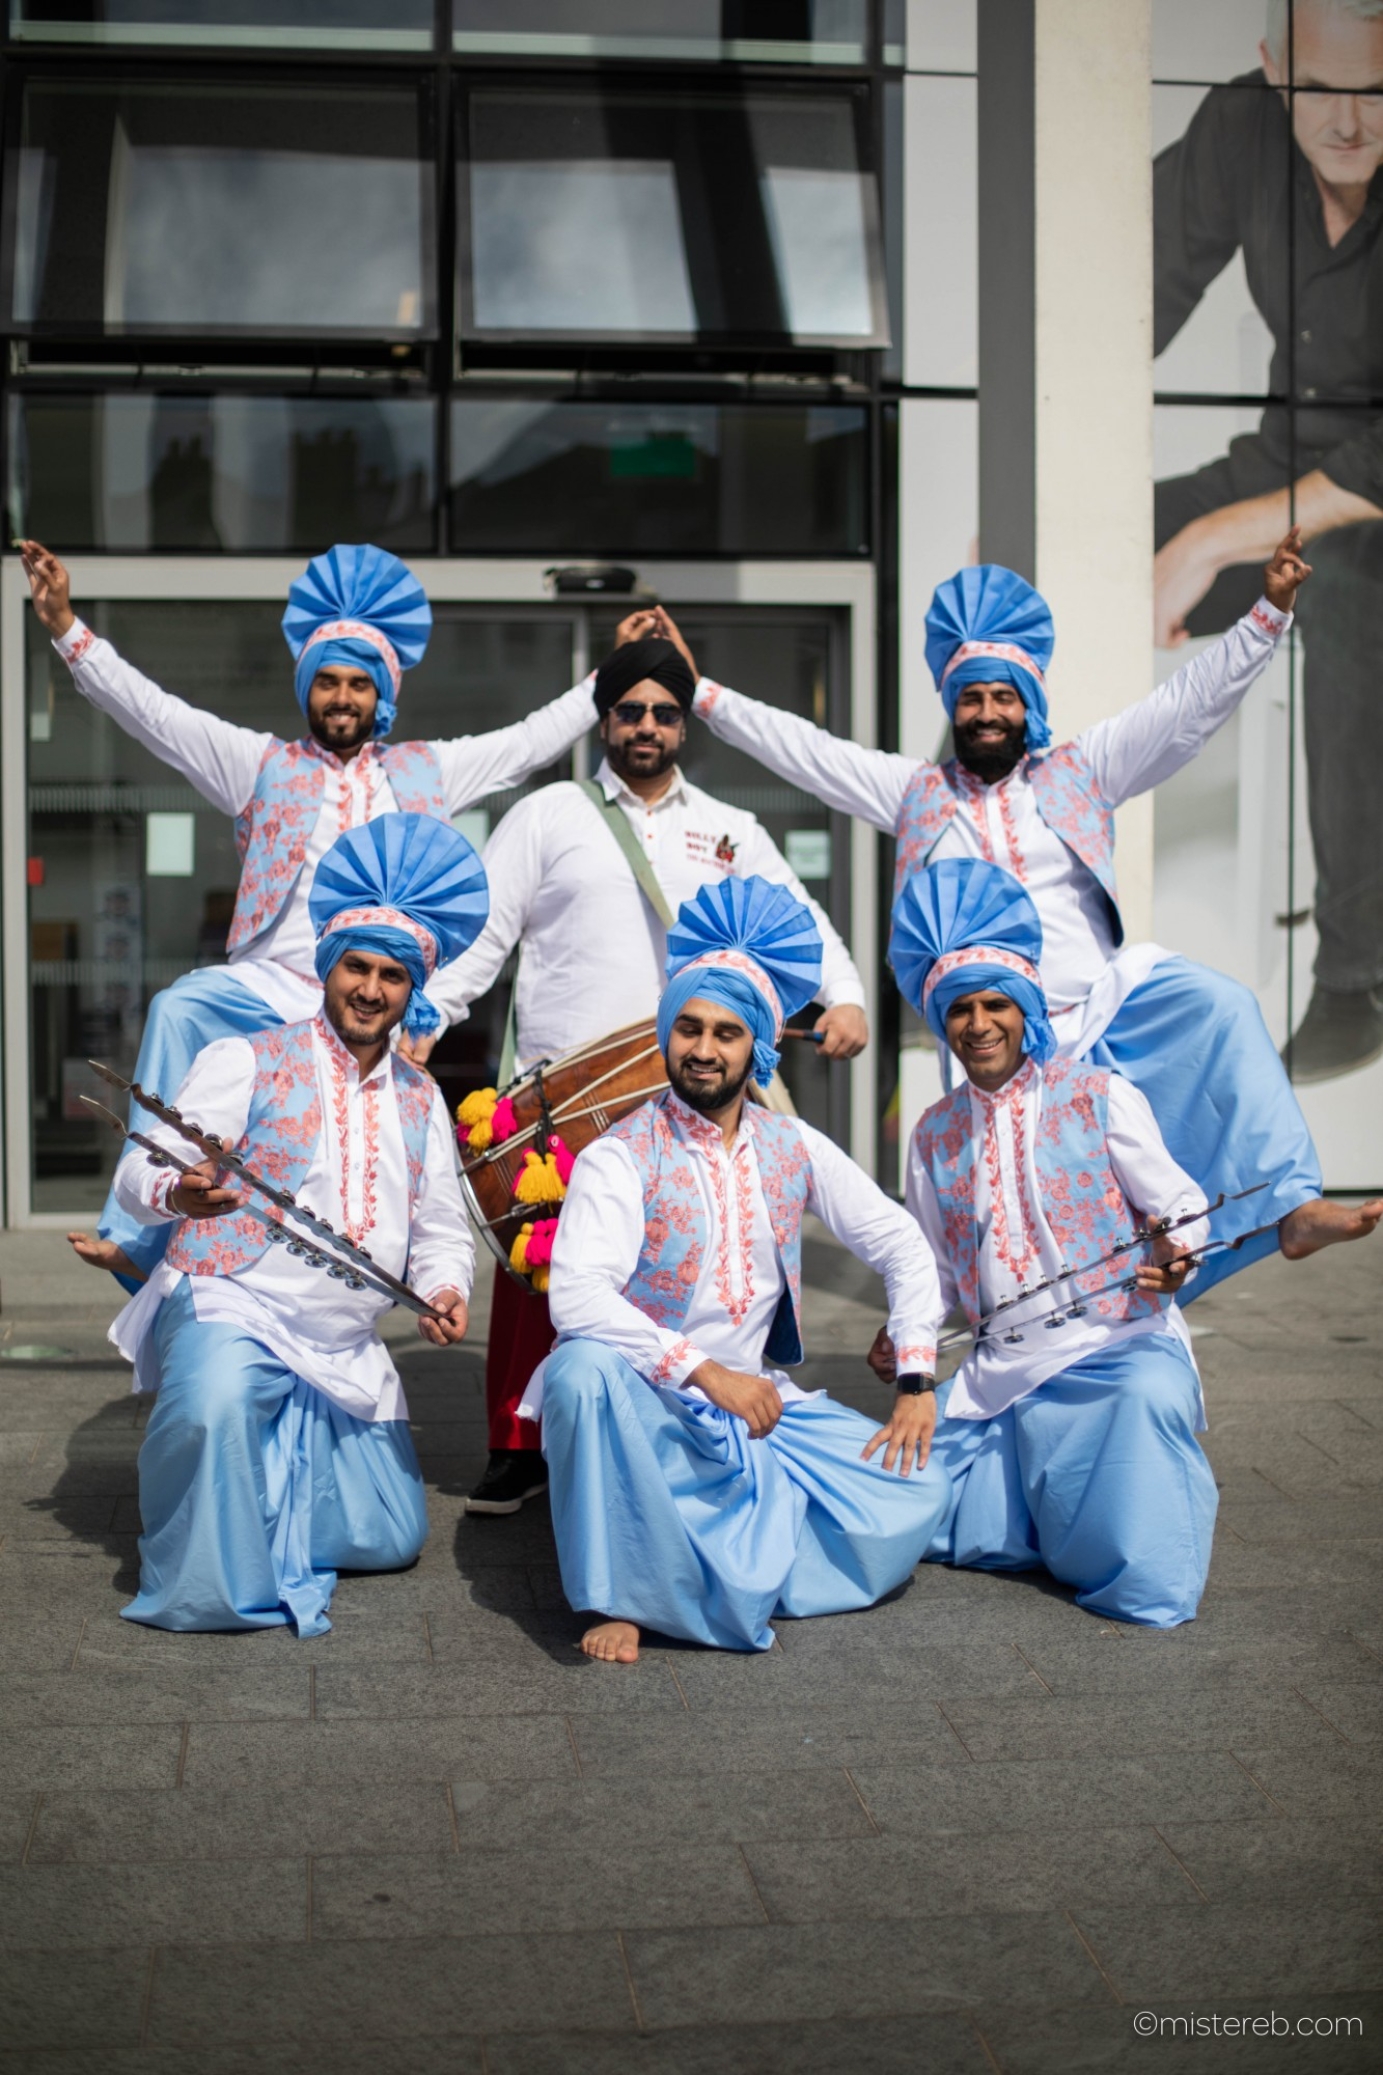 Press photo for 4x4 Bhangra by mistereb